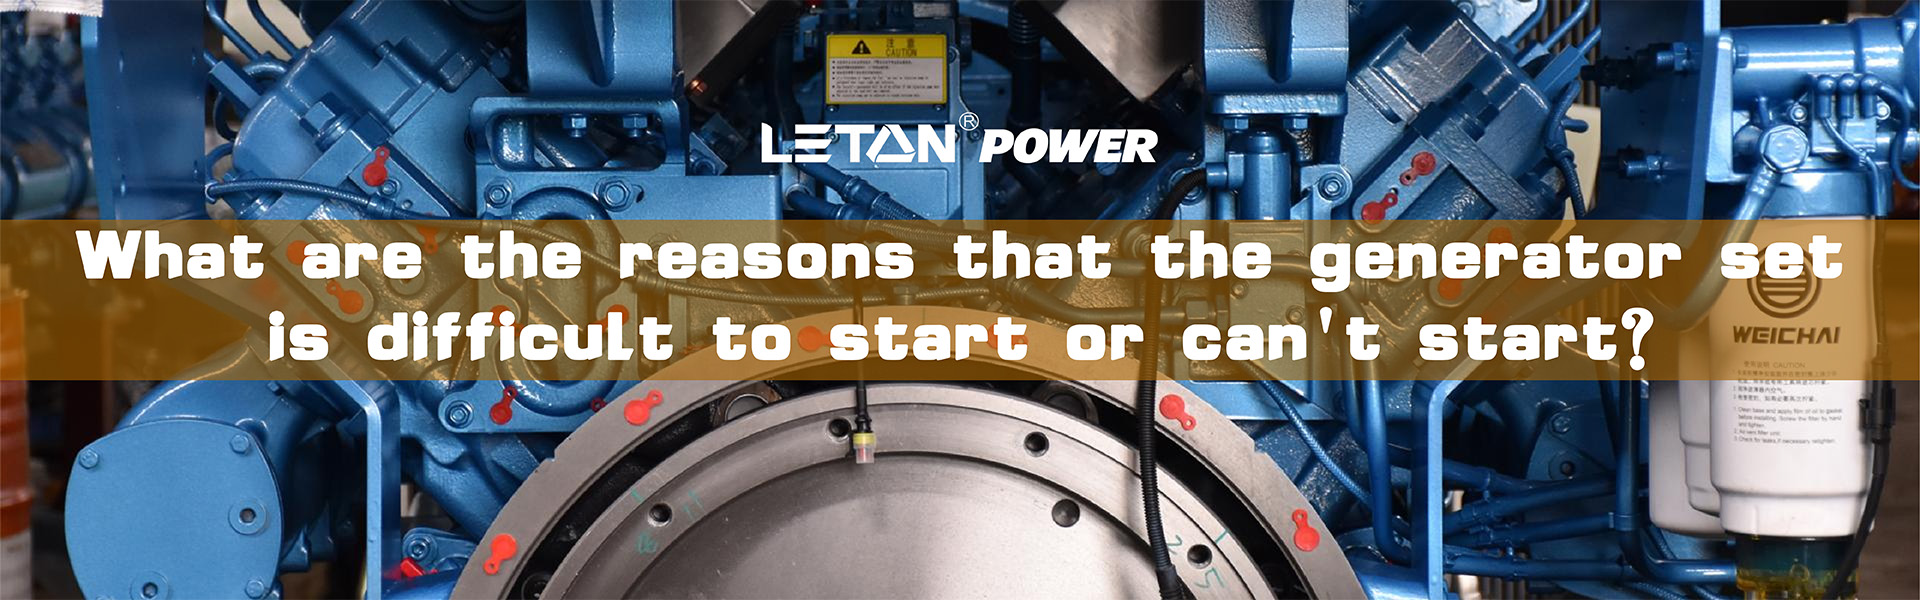 What are the reasons that the generator set is difficult to start or can’t start?